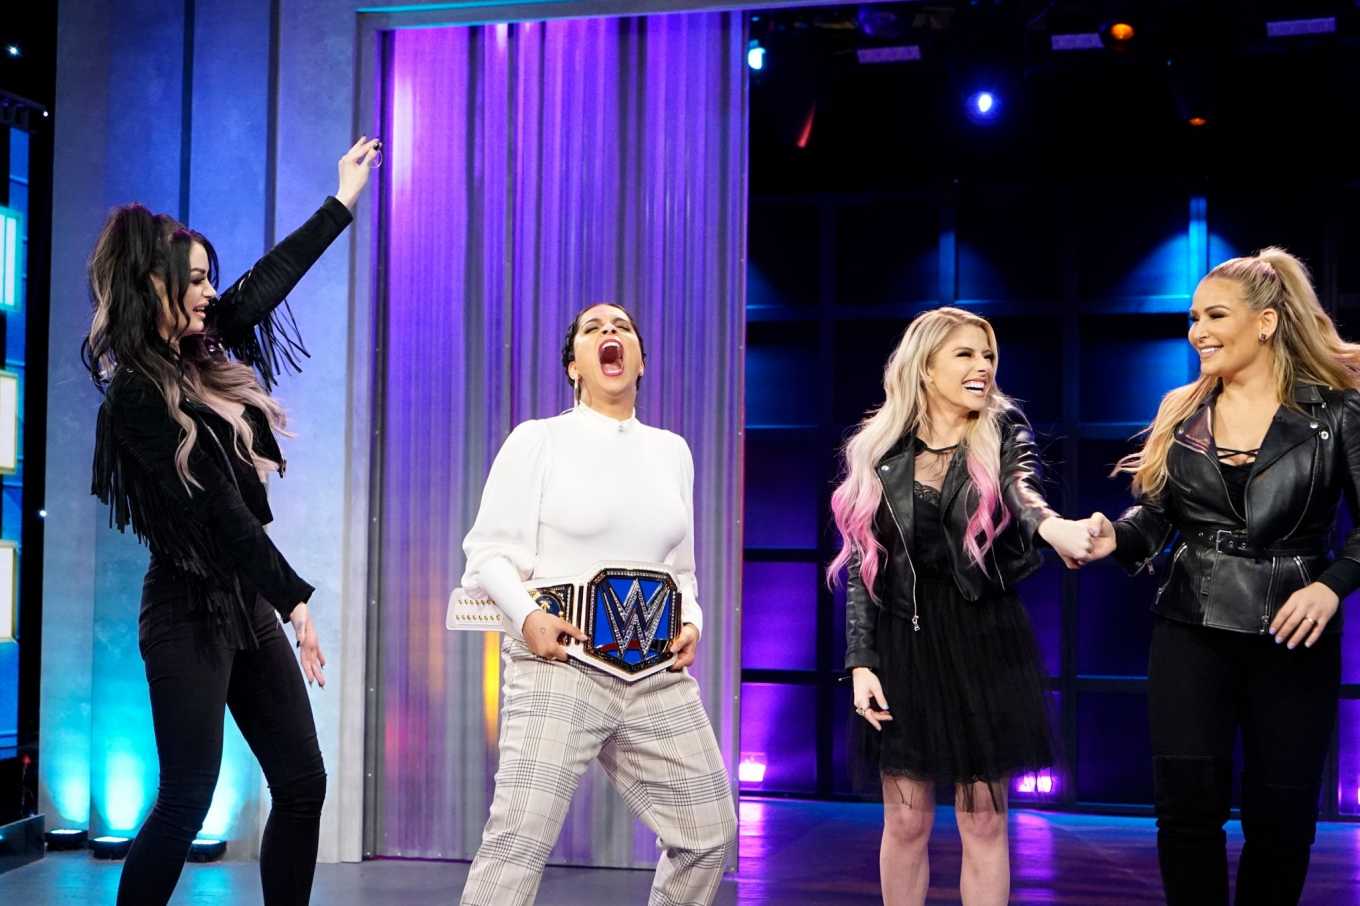 Alexa Bliss 2020 : Alexa Bliss Paige and Natalya Neidhart – A Little Late with Lilly Singh-02